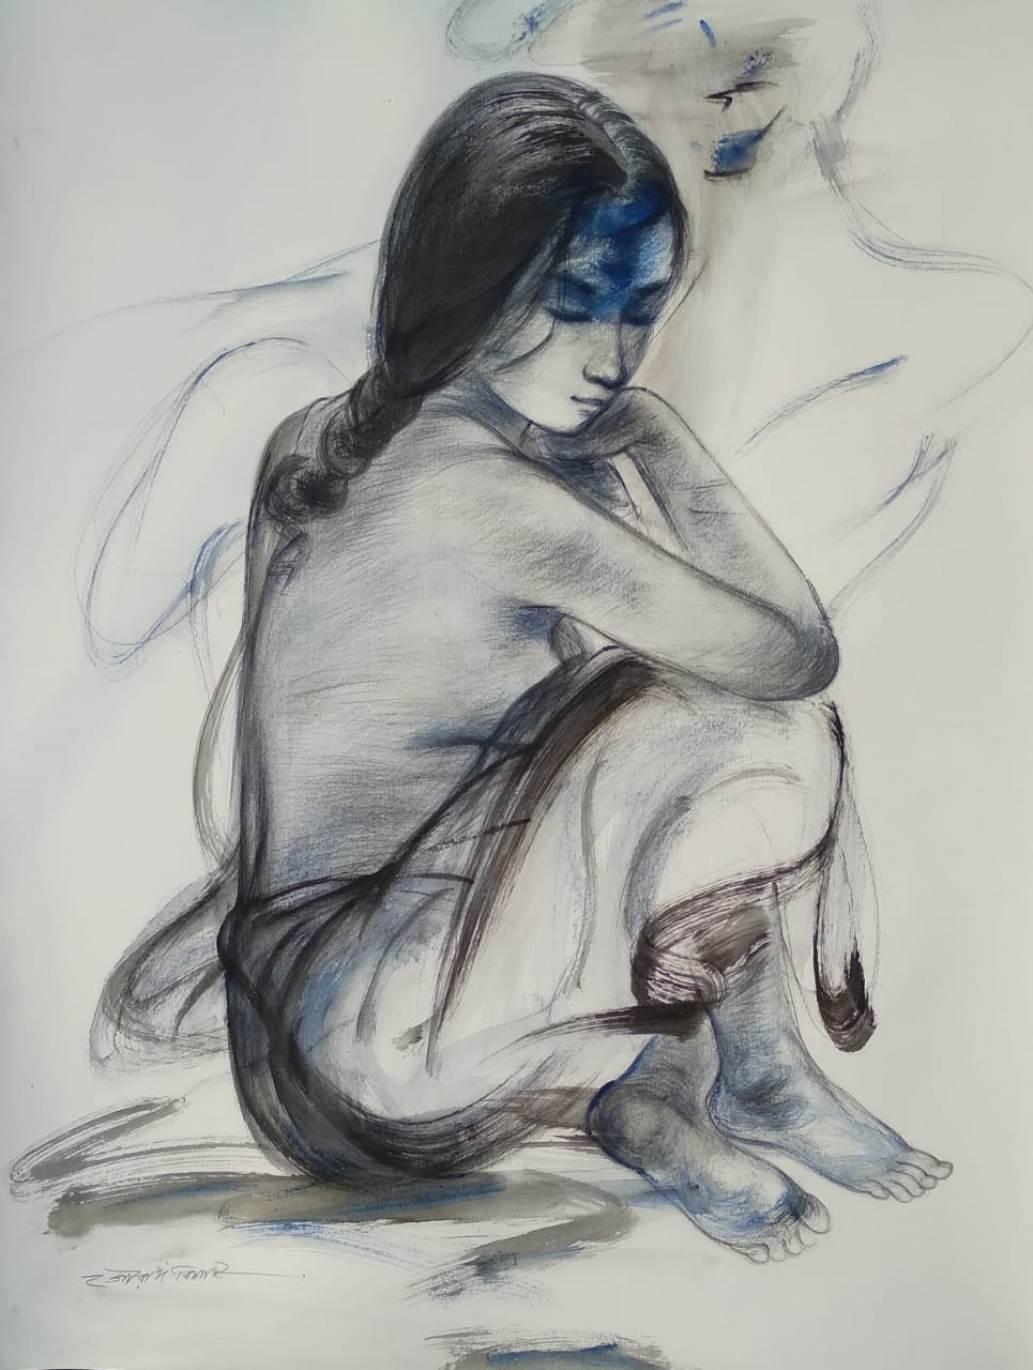 Gaurango Beshai  Figurative Painting - Untitled, Mixed Media on Paper by Contemporary Artist “In Stock”